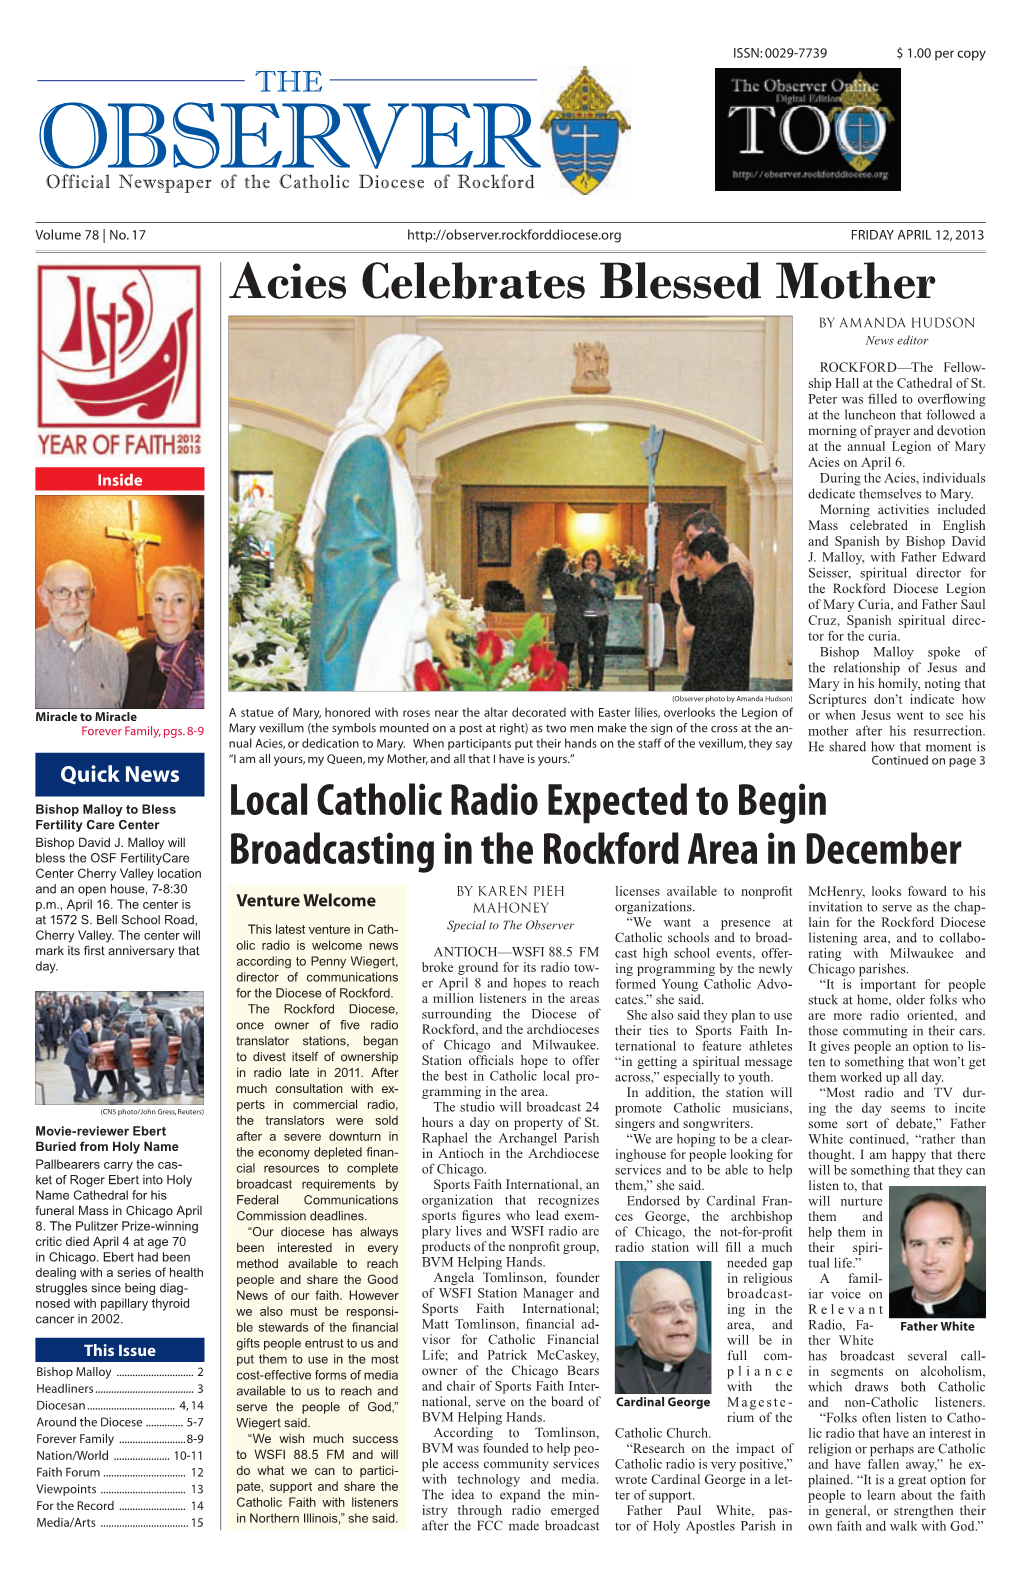 Acies Celebrates Blessed Mother by AMANDA HUDSON News Editor ROCKFORD—The Fellow- Ship Hall at the Cathedral of St